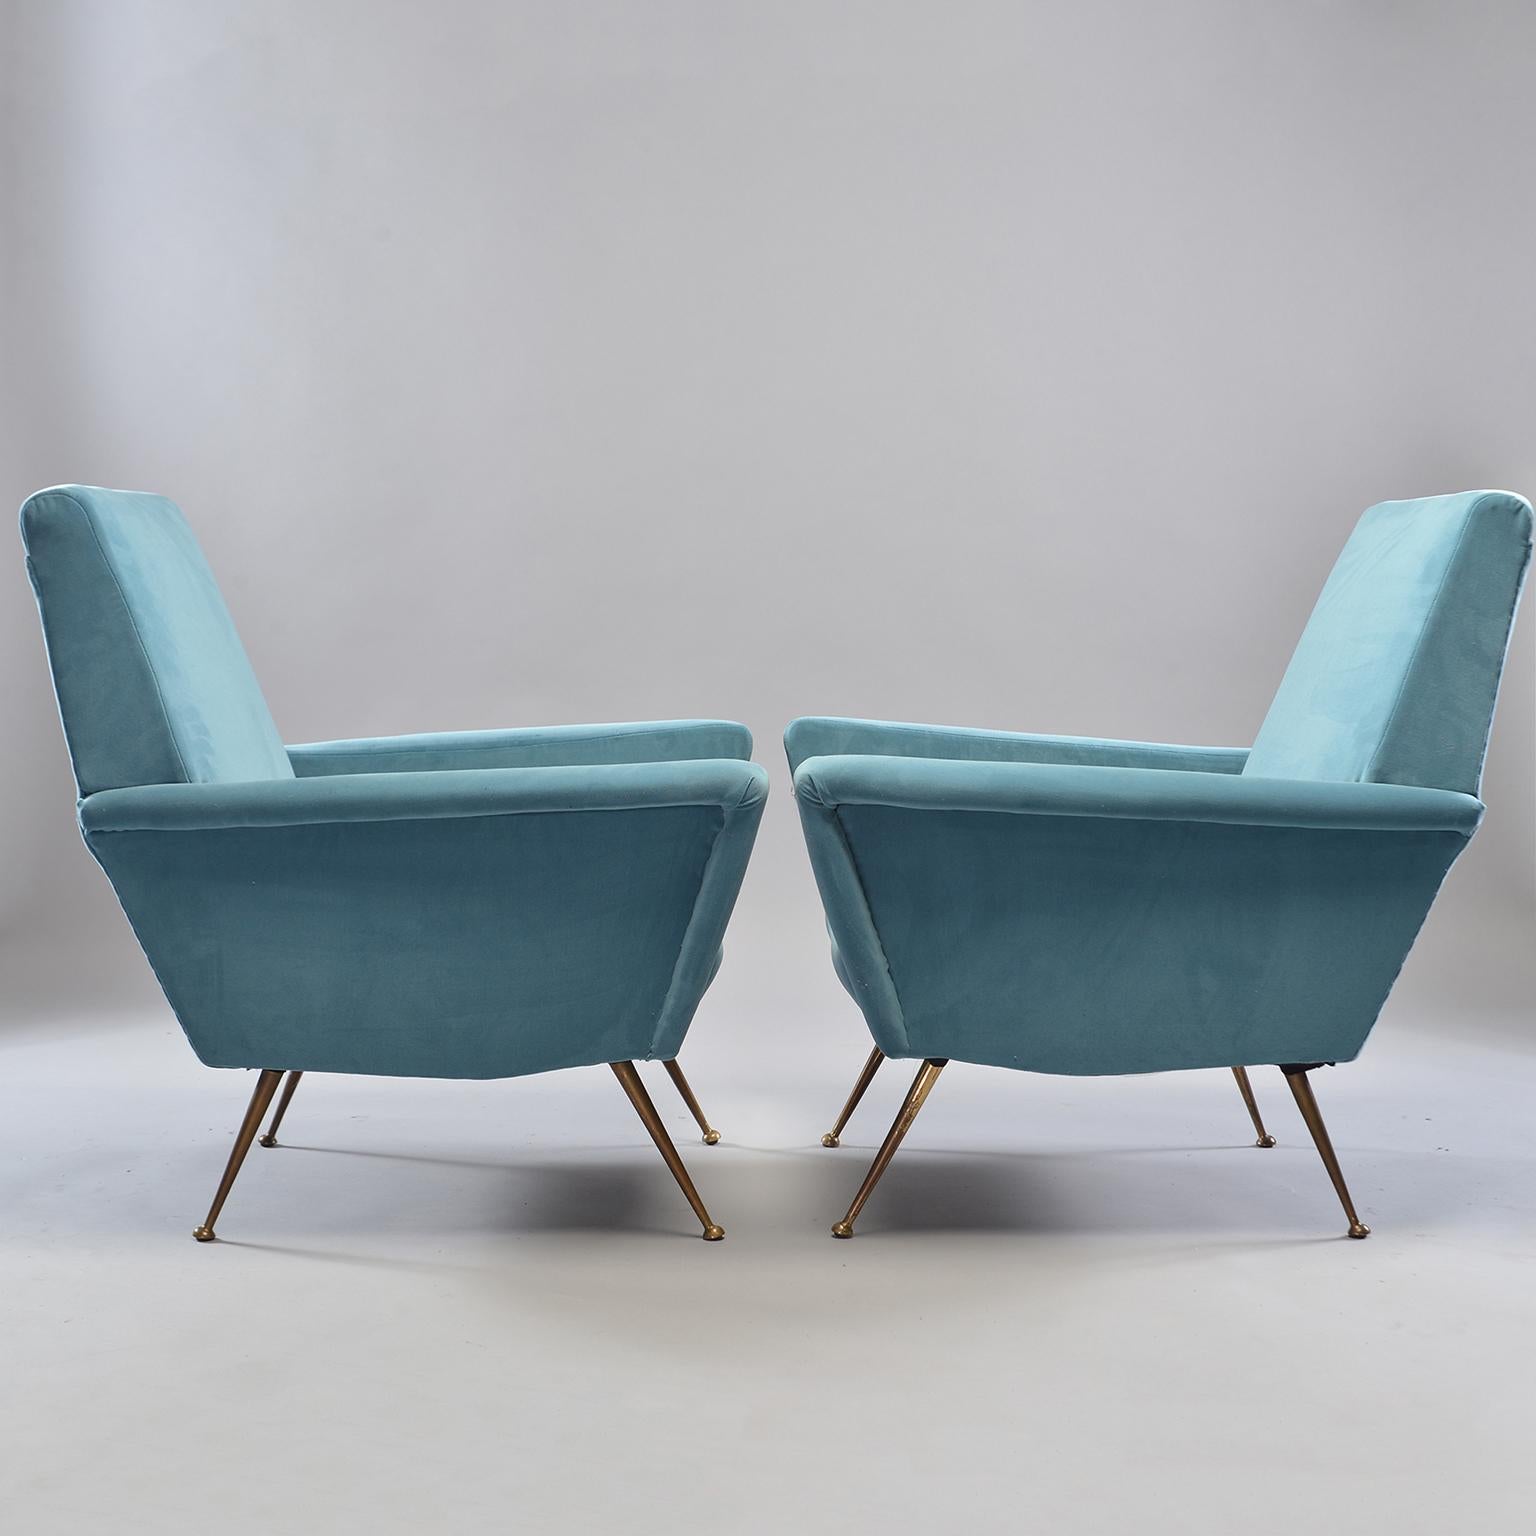 Metal Pair of Midcentury Italian Armchairs with New Upholstery